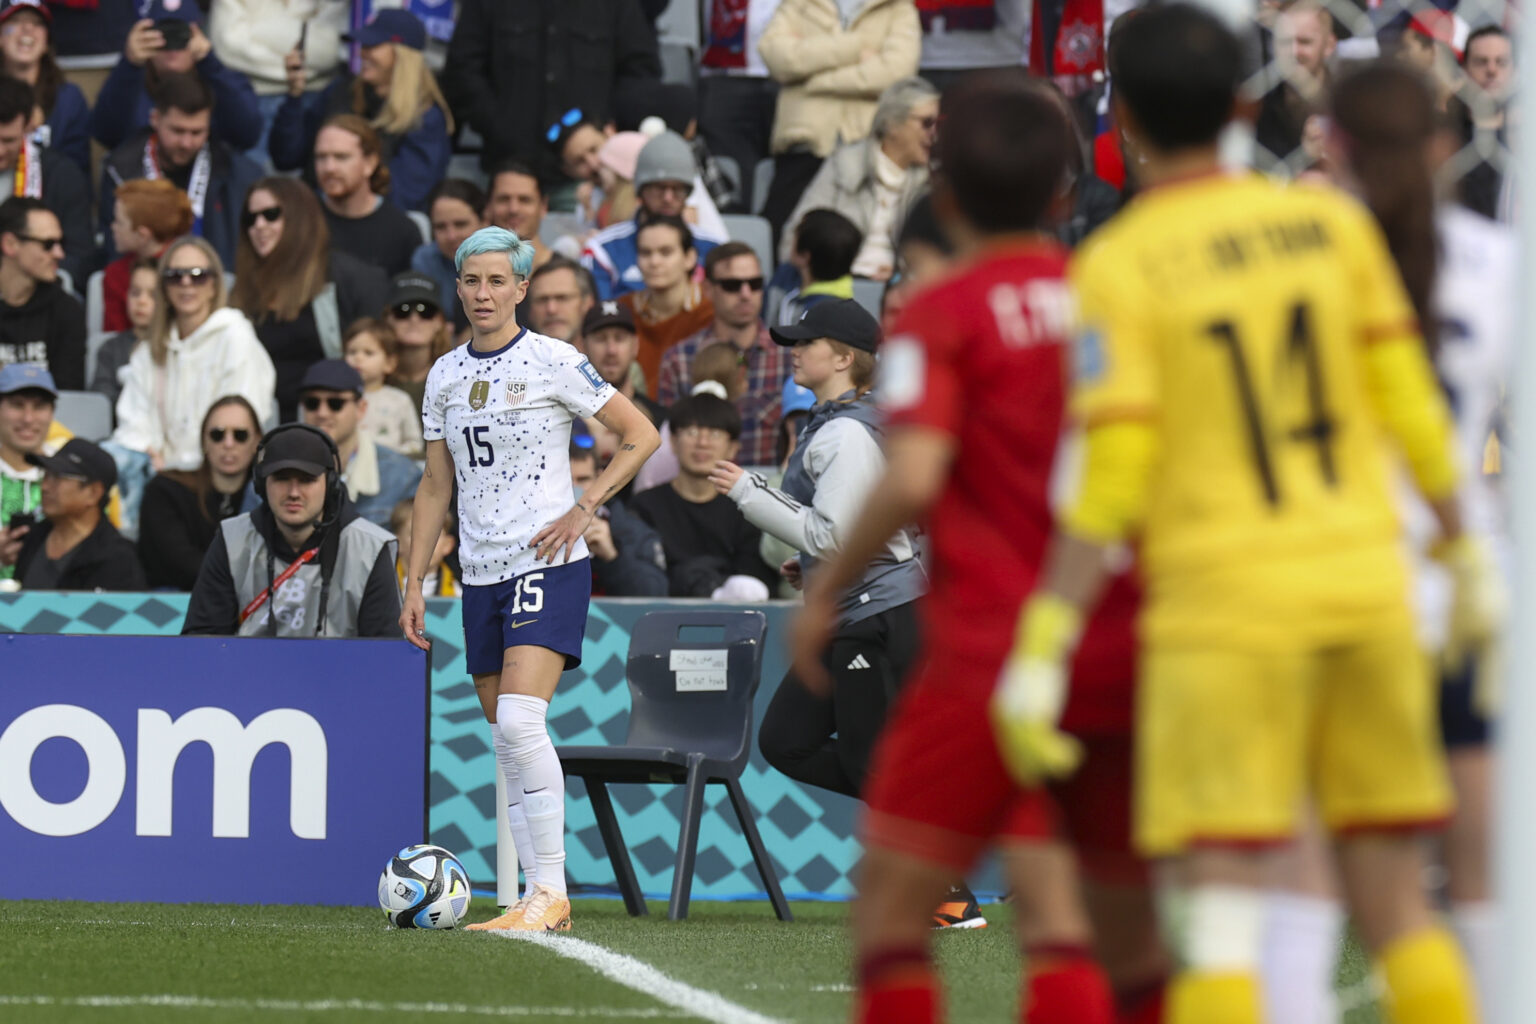 LGBTQ+ community proud and visible at Women's World Cup Inquirer Sports